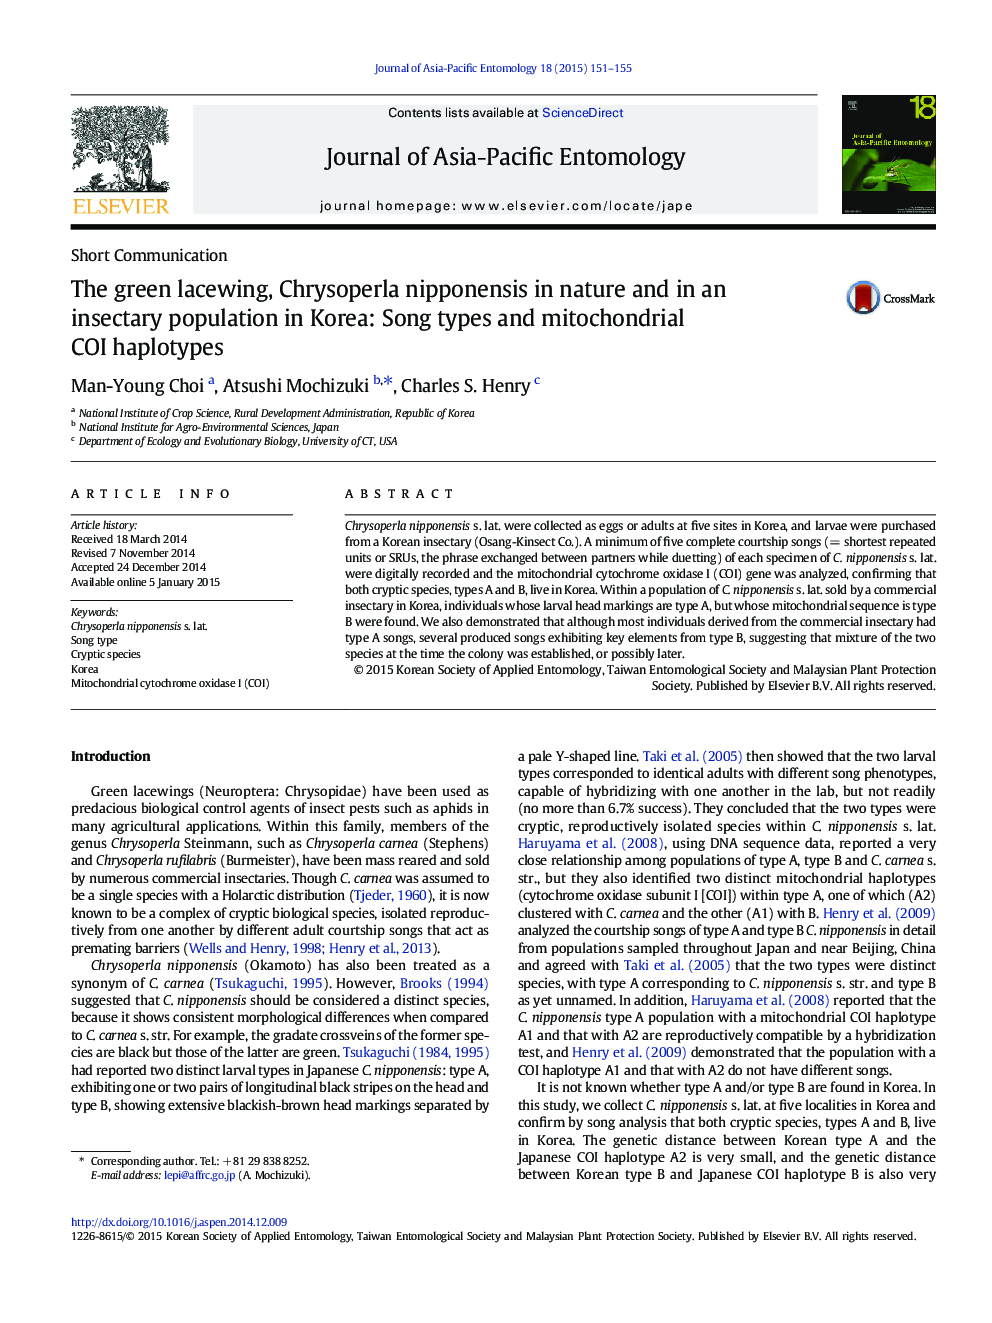 The green lacewing, Chrysoperla nipponensis in nature and in an insectary population in Korea: Song types and mitochondrial COI haplotypes